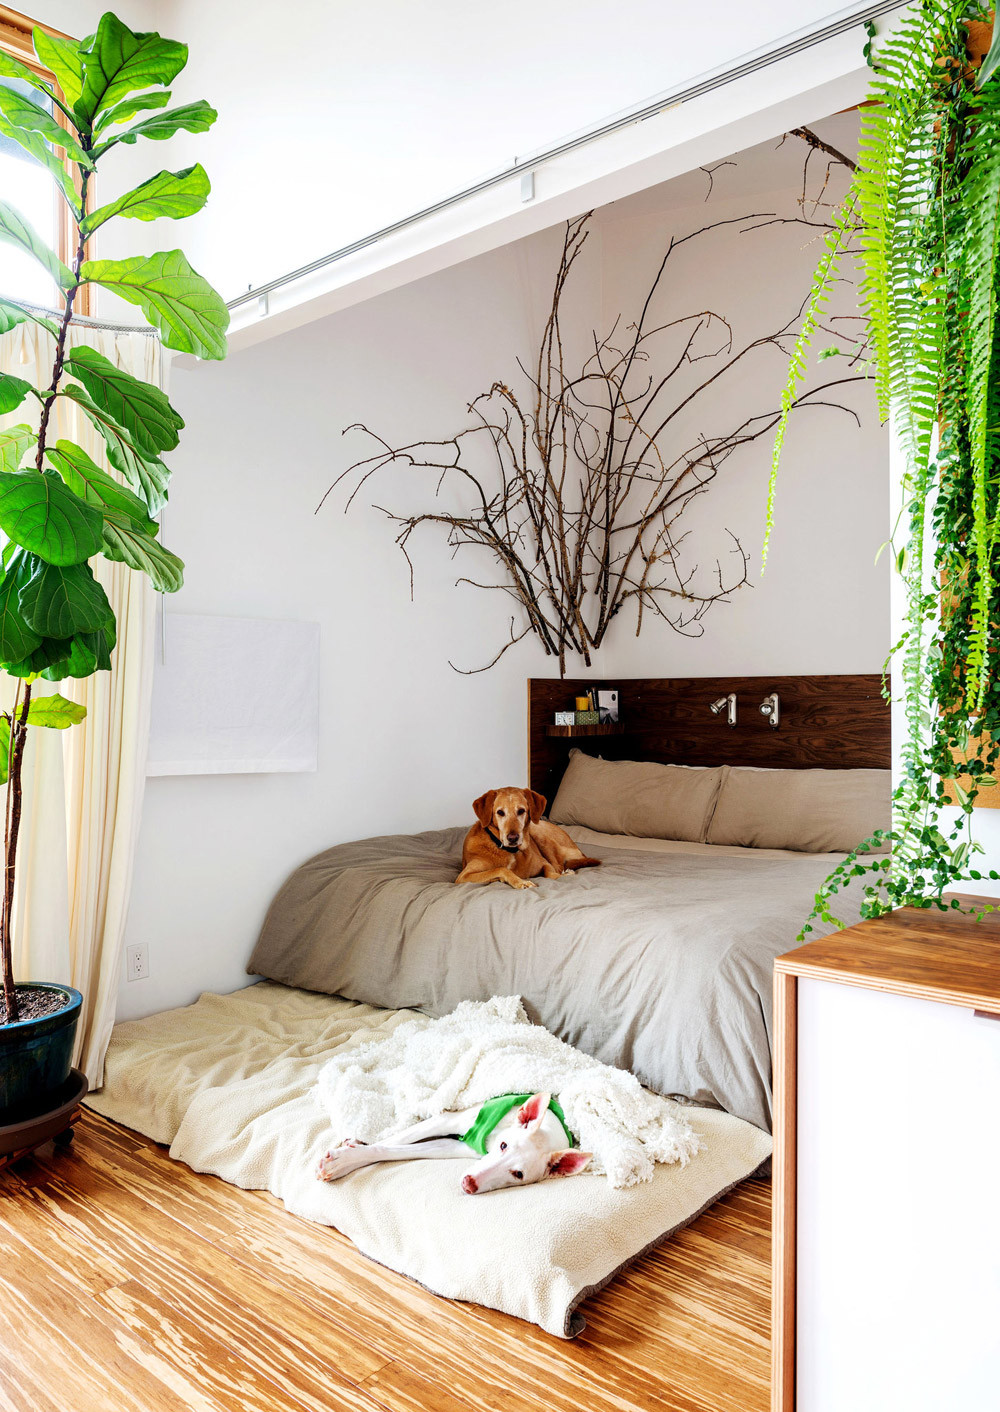 Small Plants for Bedroom Fresh Design Highlight Bedrooms Using Live Plants as Decor